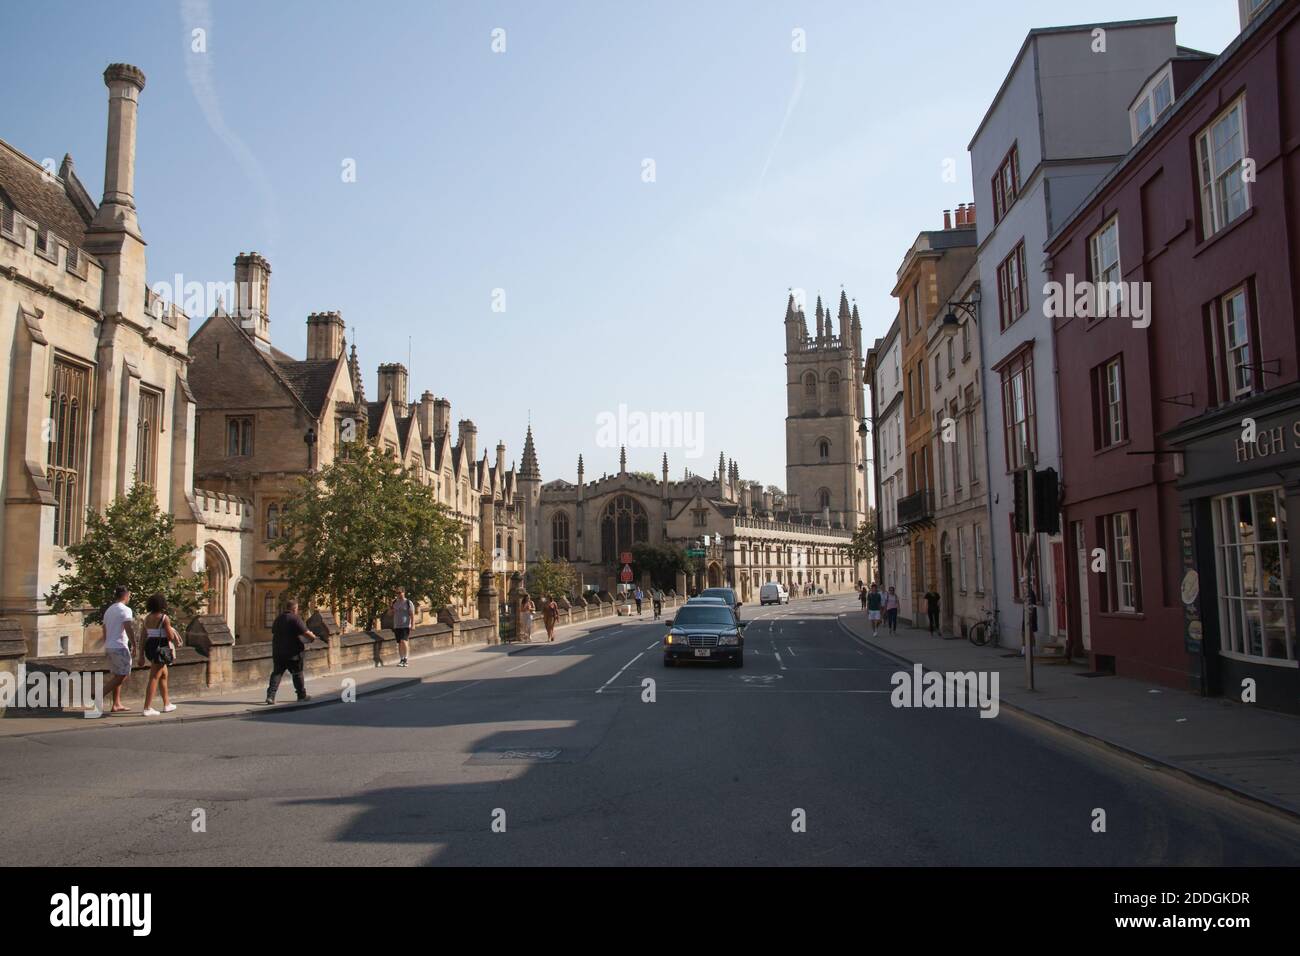 Views of Oxford High Street, including Magdalen College in the UK, taken on the 15th of September 2020 Stock Photo